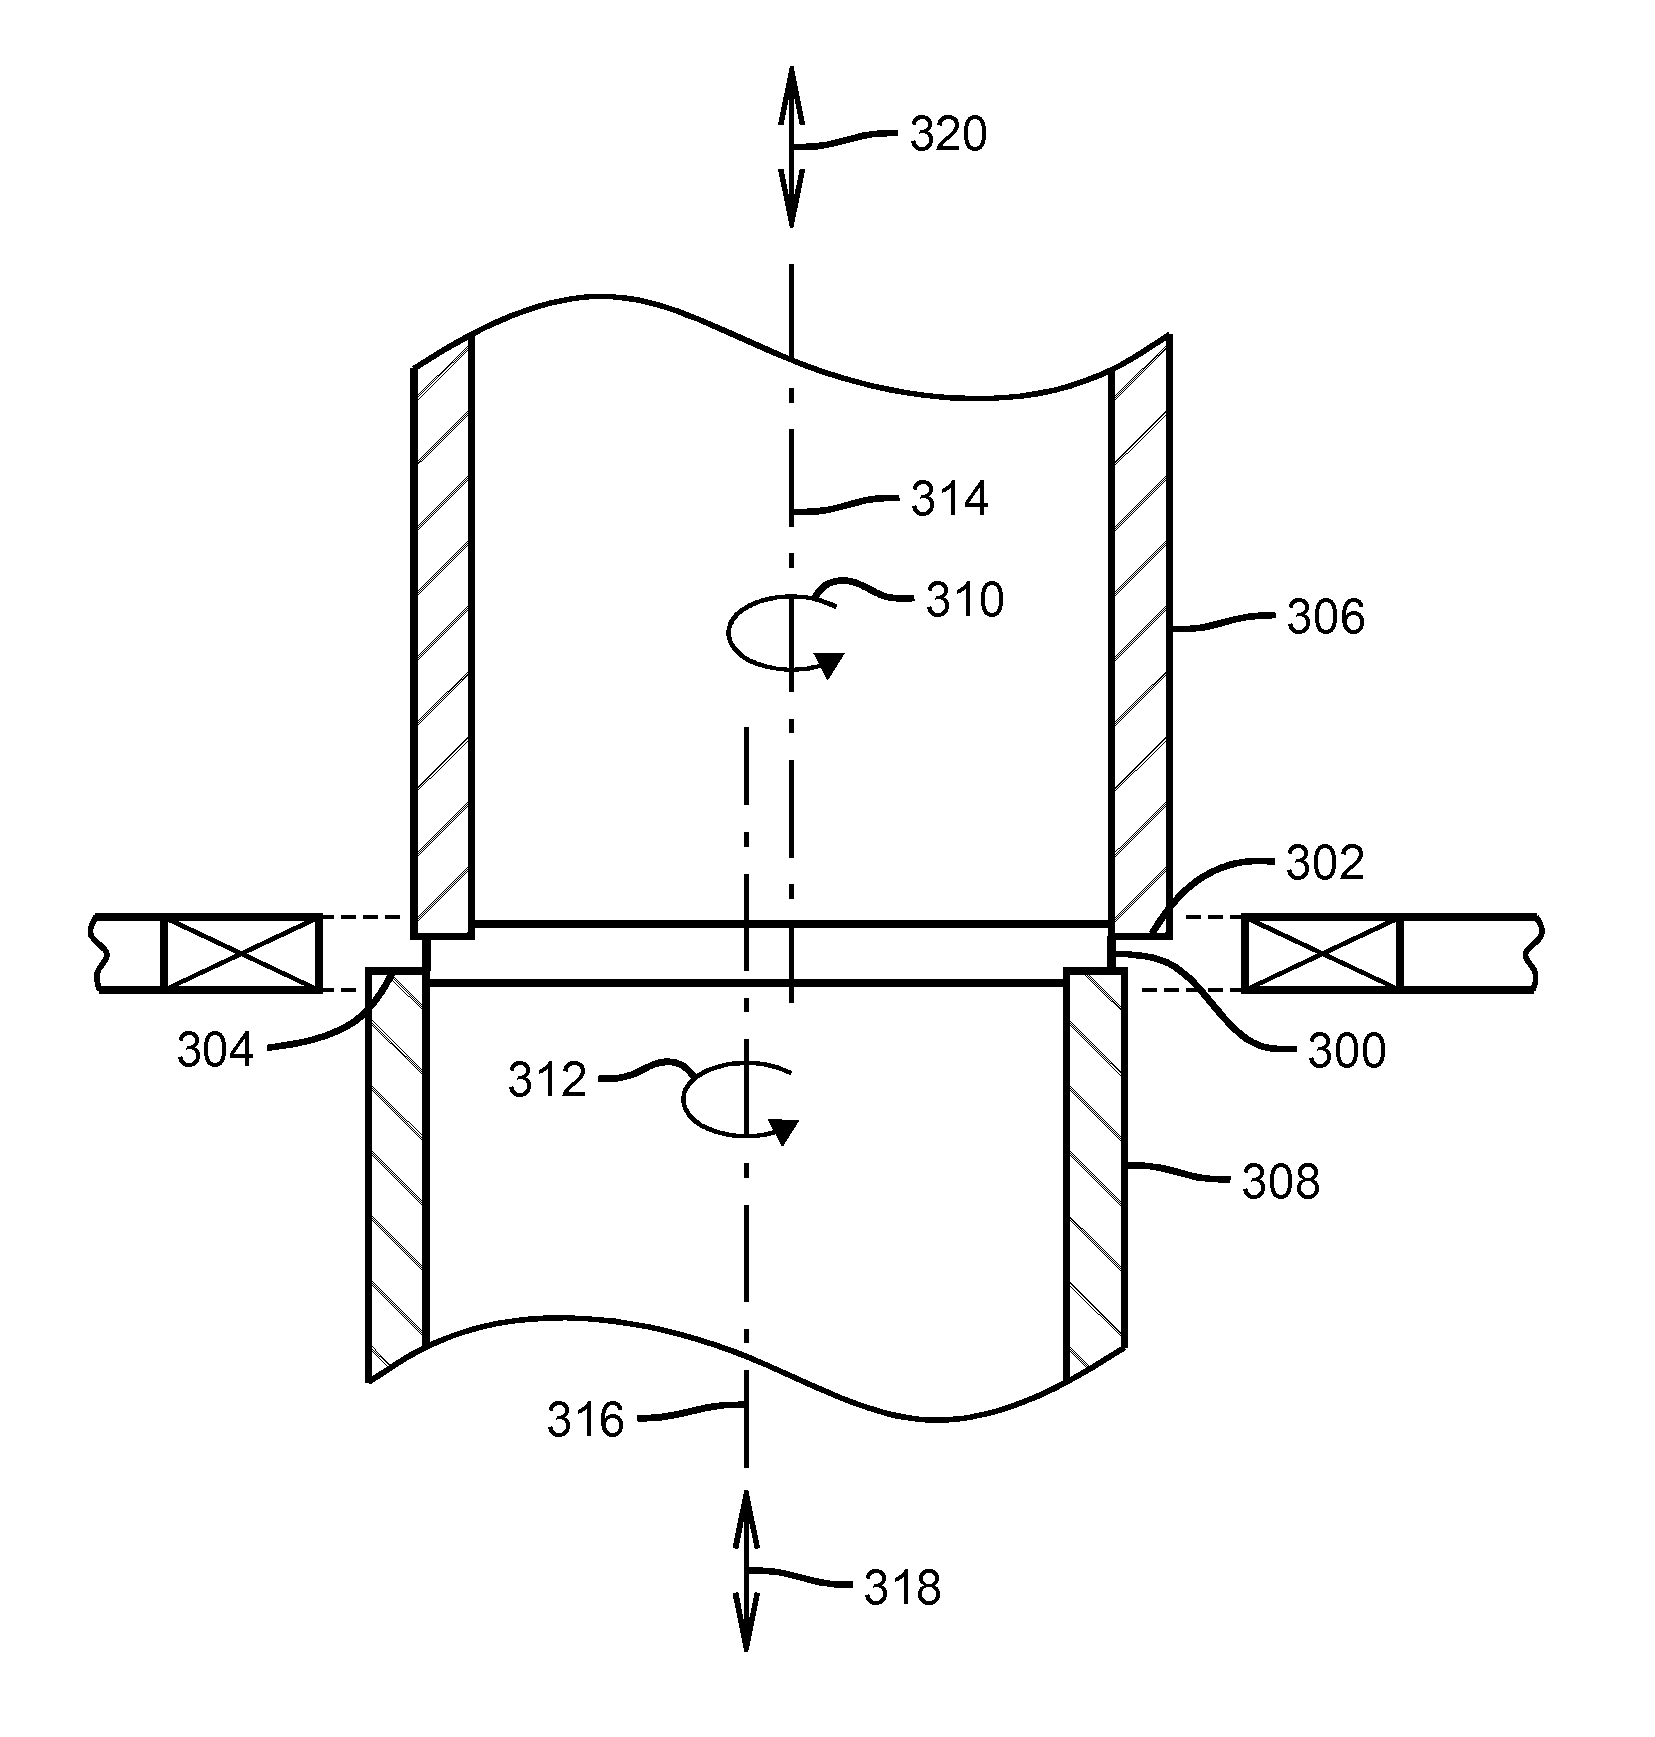 Enhanced Arc Control for Magnetically Impelled Butt Welding